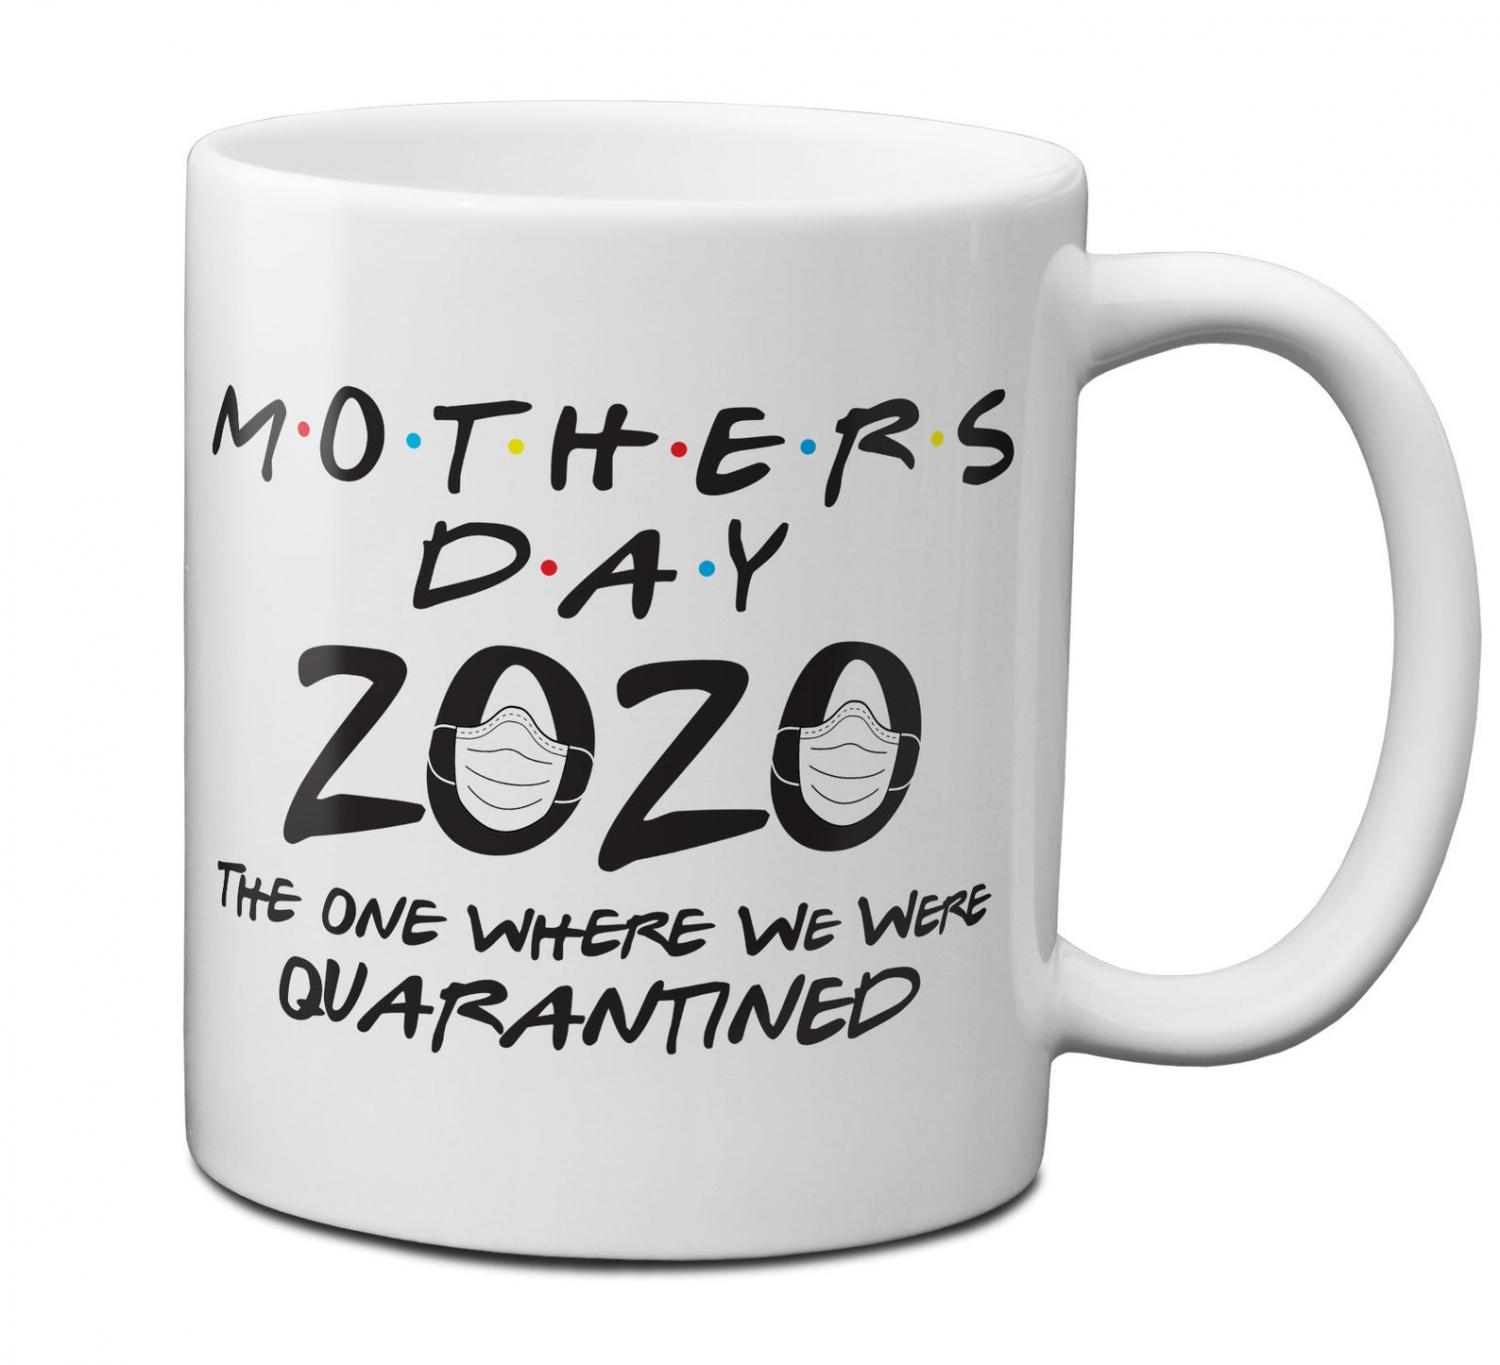 Mothers Day 2020 Coffee Mug - The One When We Were Quarantined (Friends TV Show Mothers Day mug)